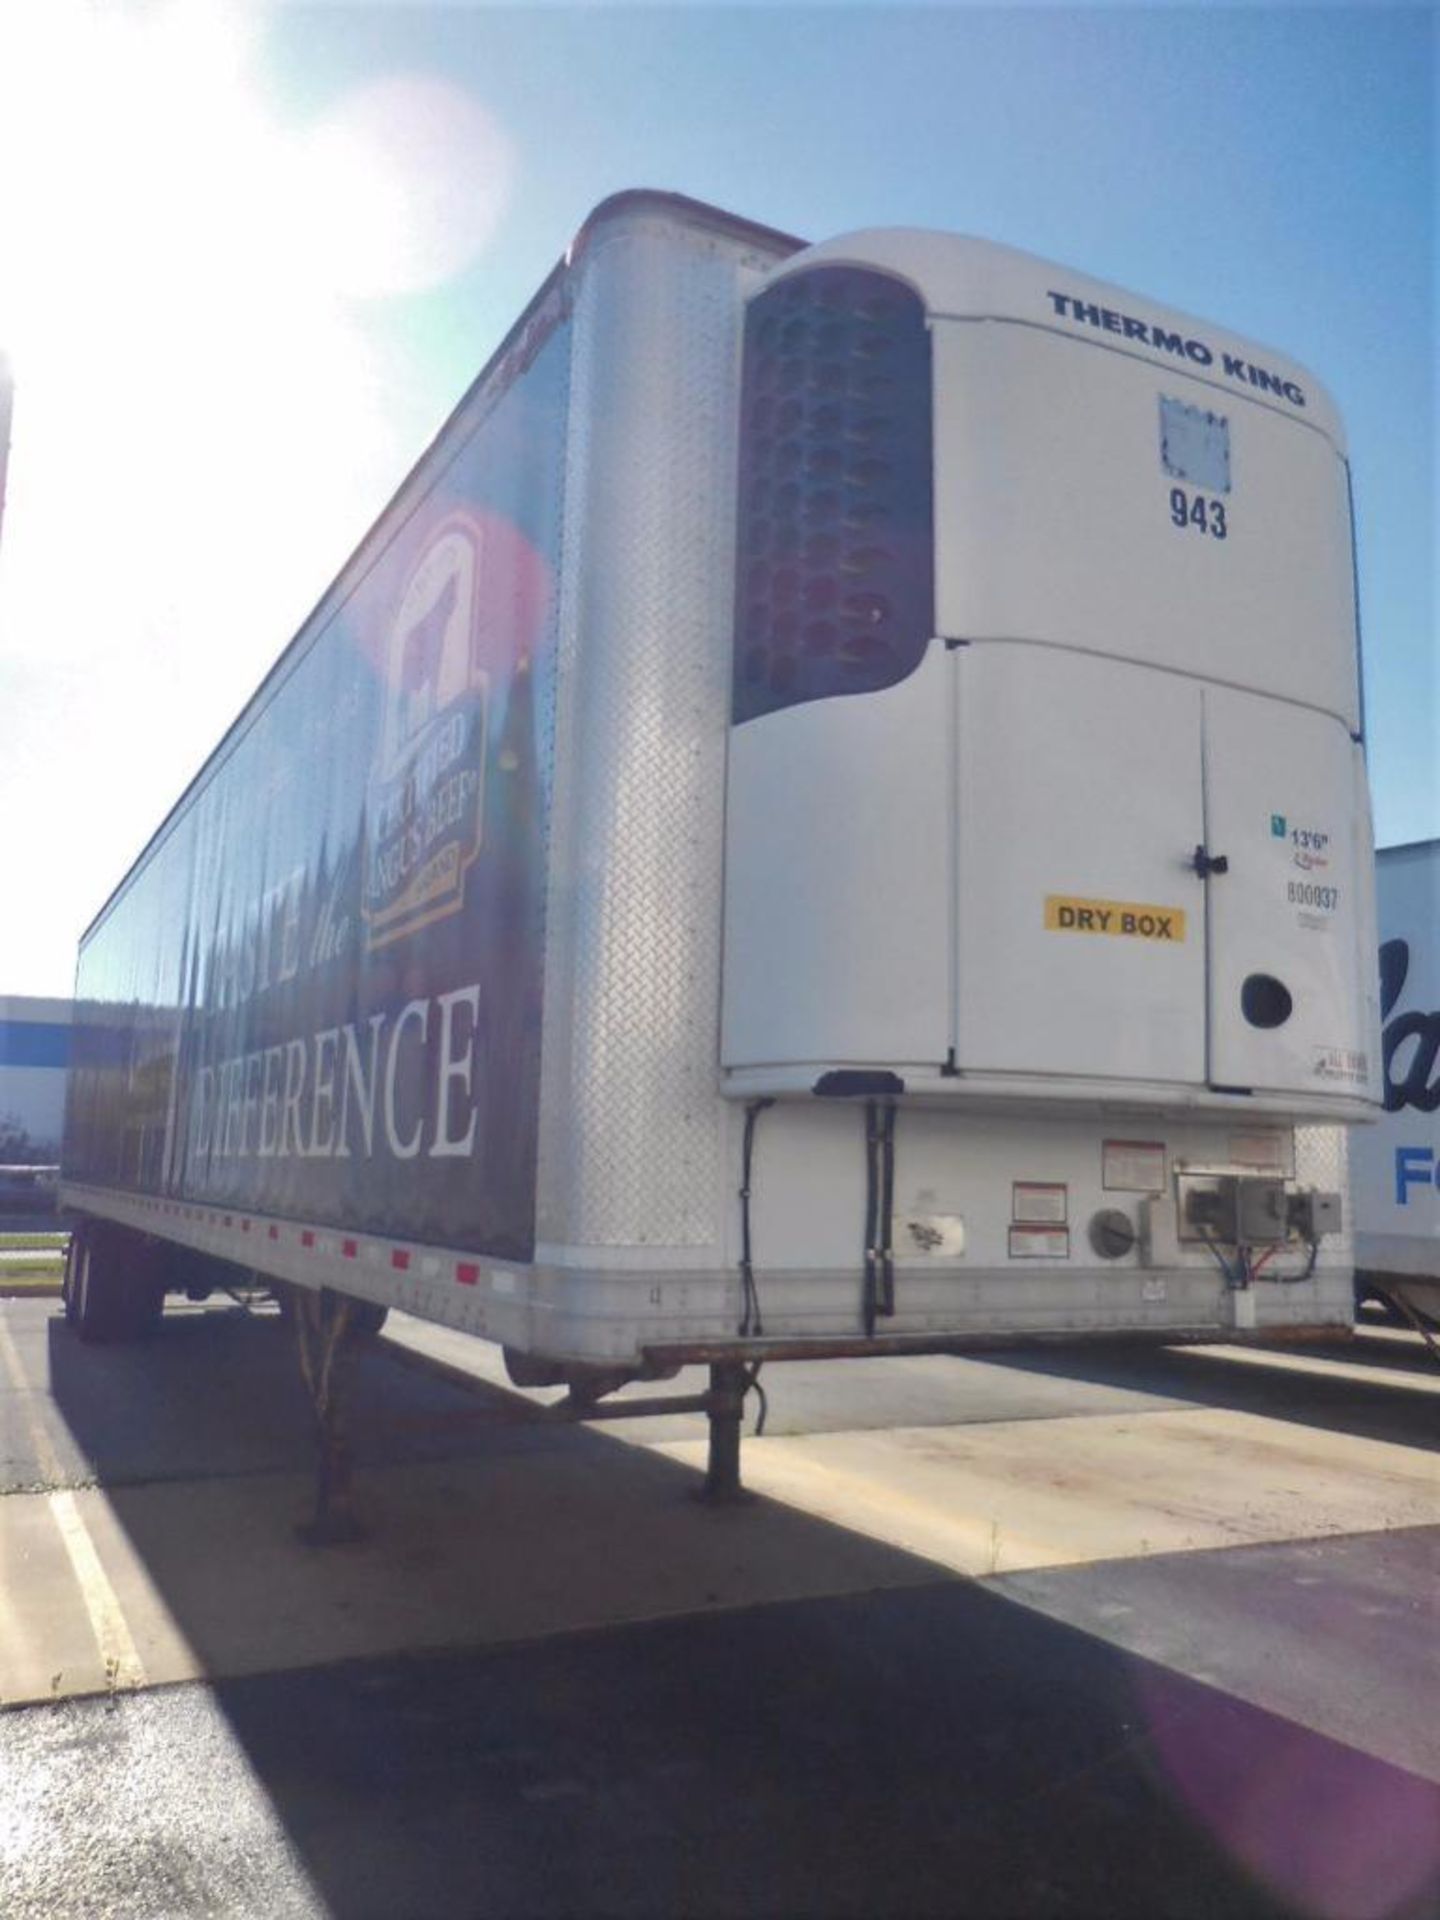 2009 Great Dane 48' Refrigerated Trailer, VIN # 1GRAA96249B702022, Unit 943 - Image 2 of 20